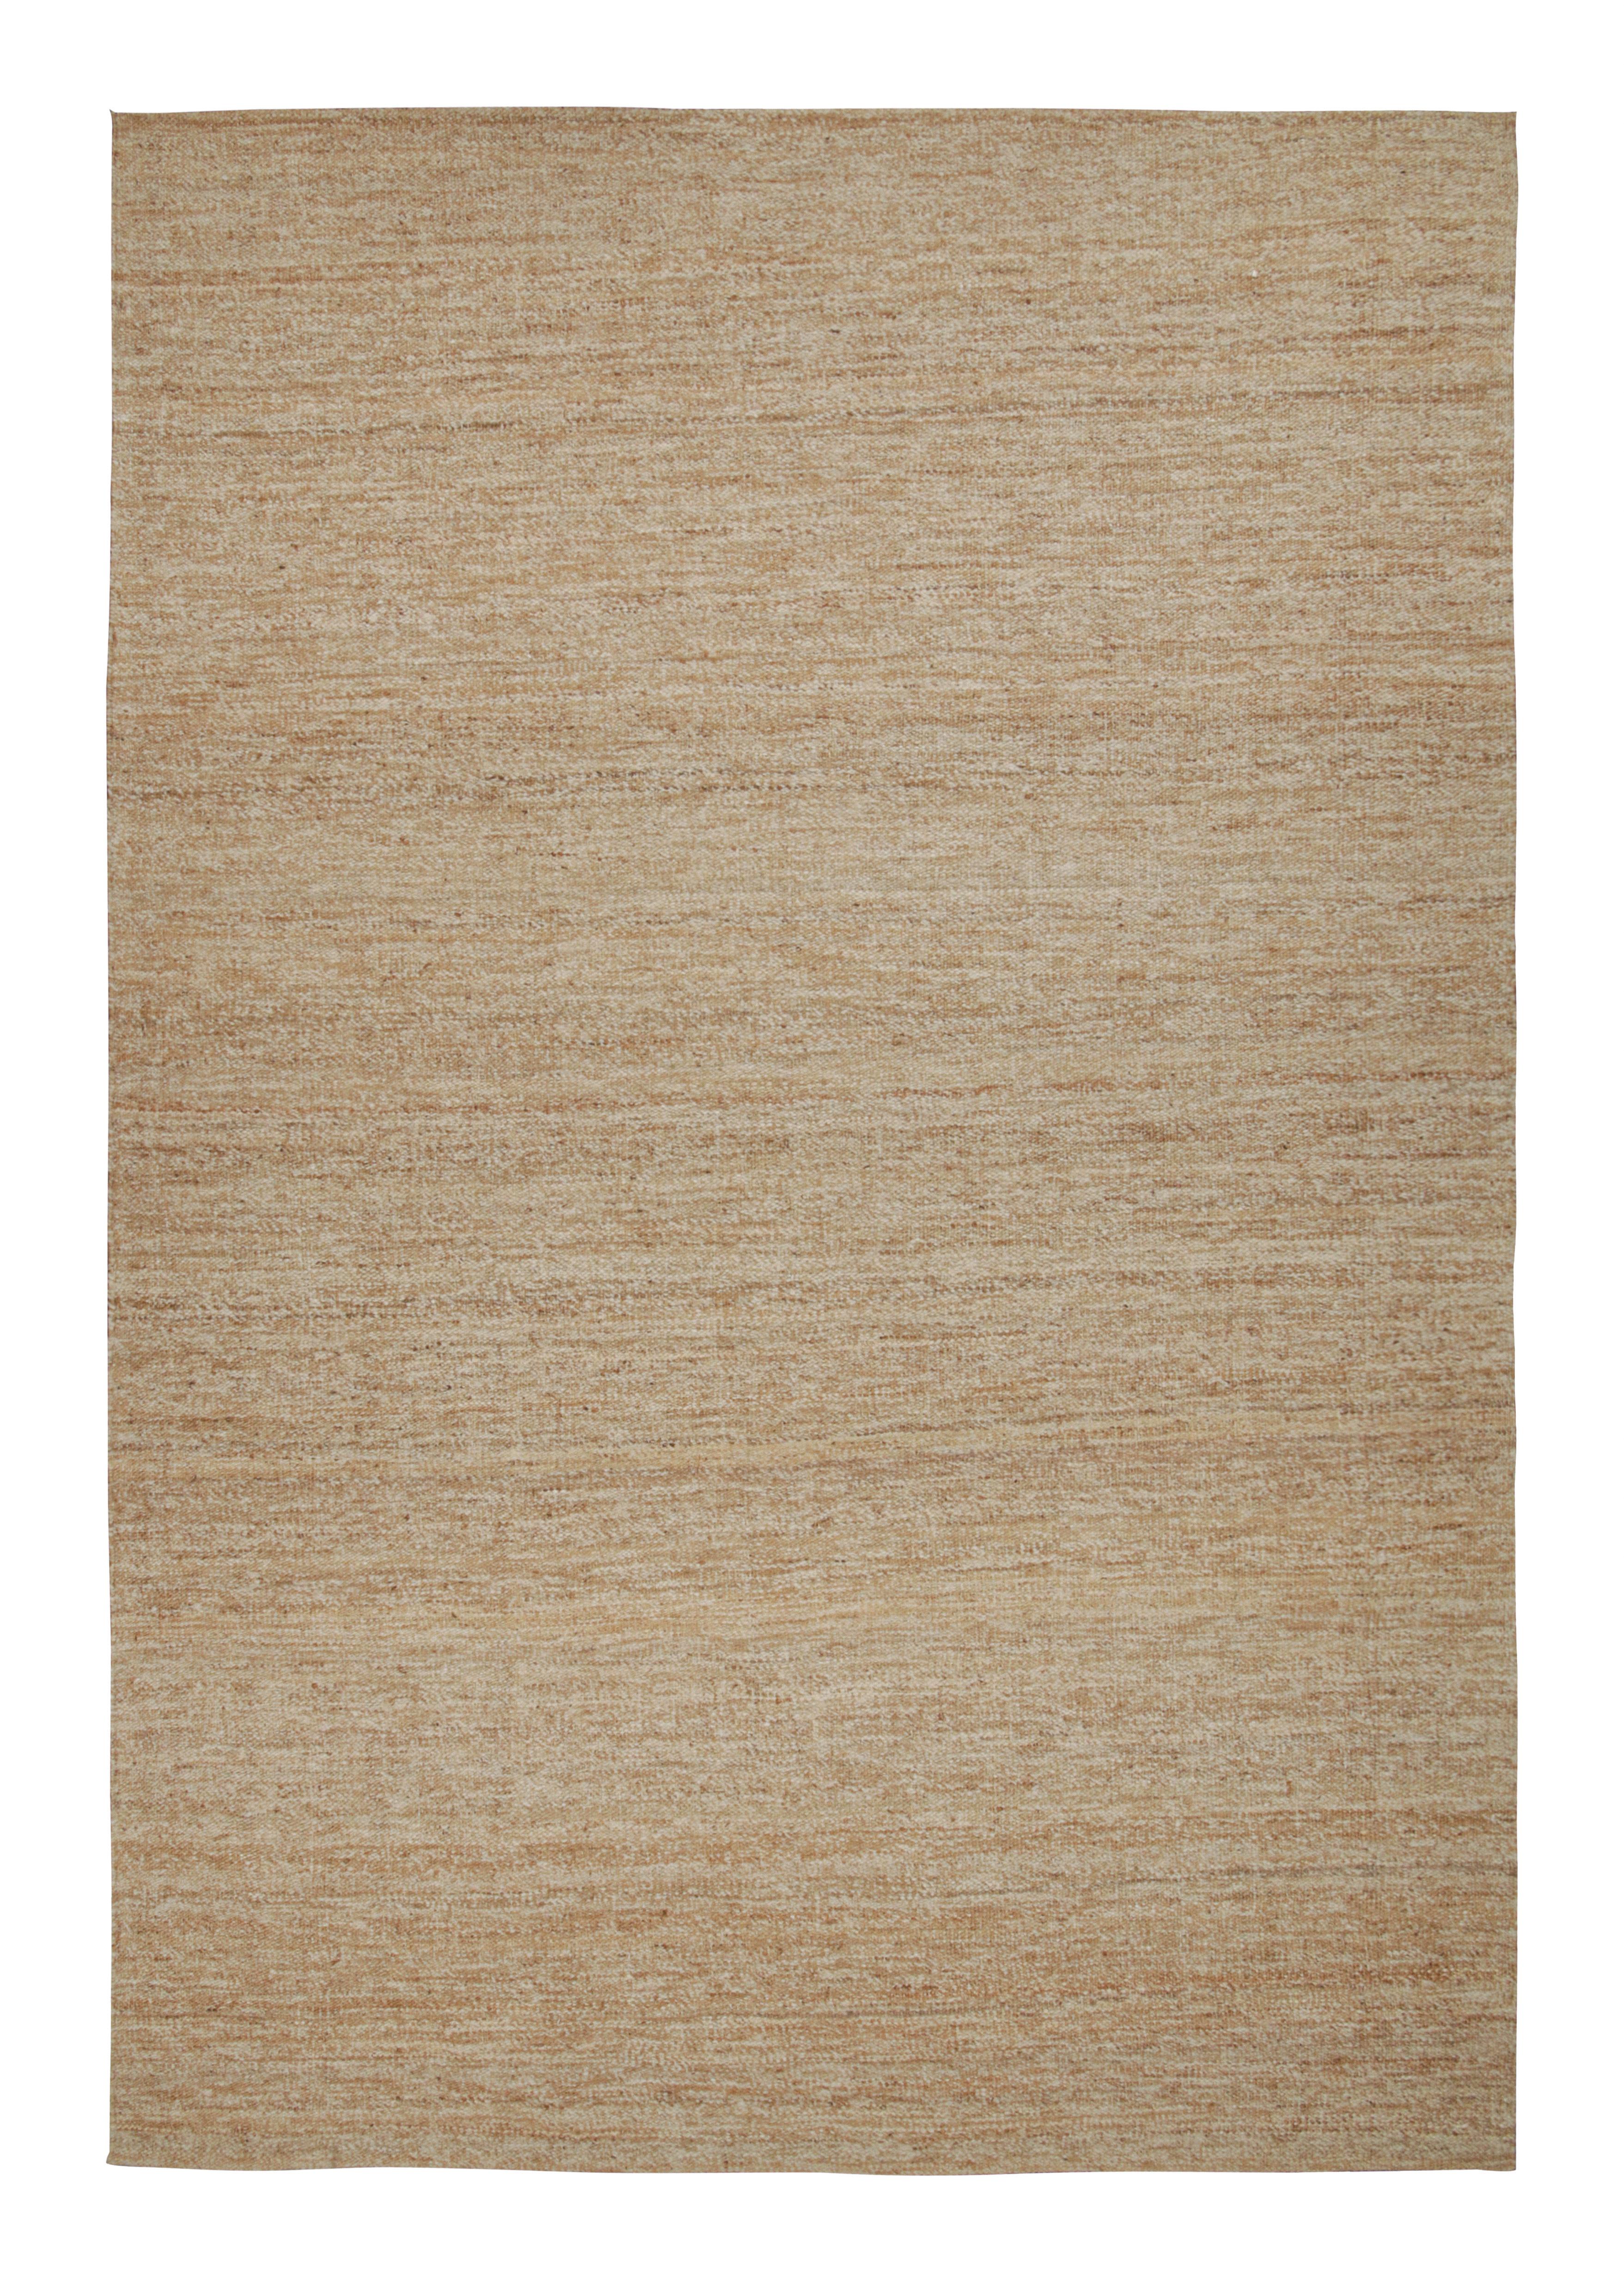 Hand-Knotted Rug & Kilim’s Contemporary Jute kilim in Beige-Brown For Sale